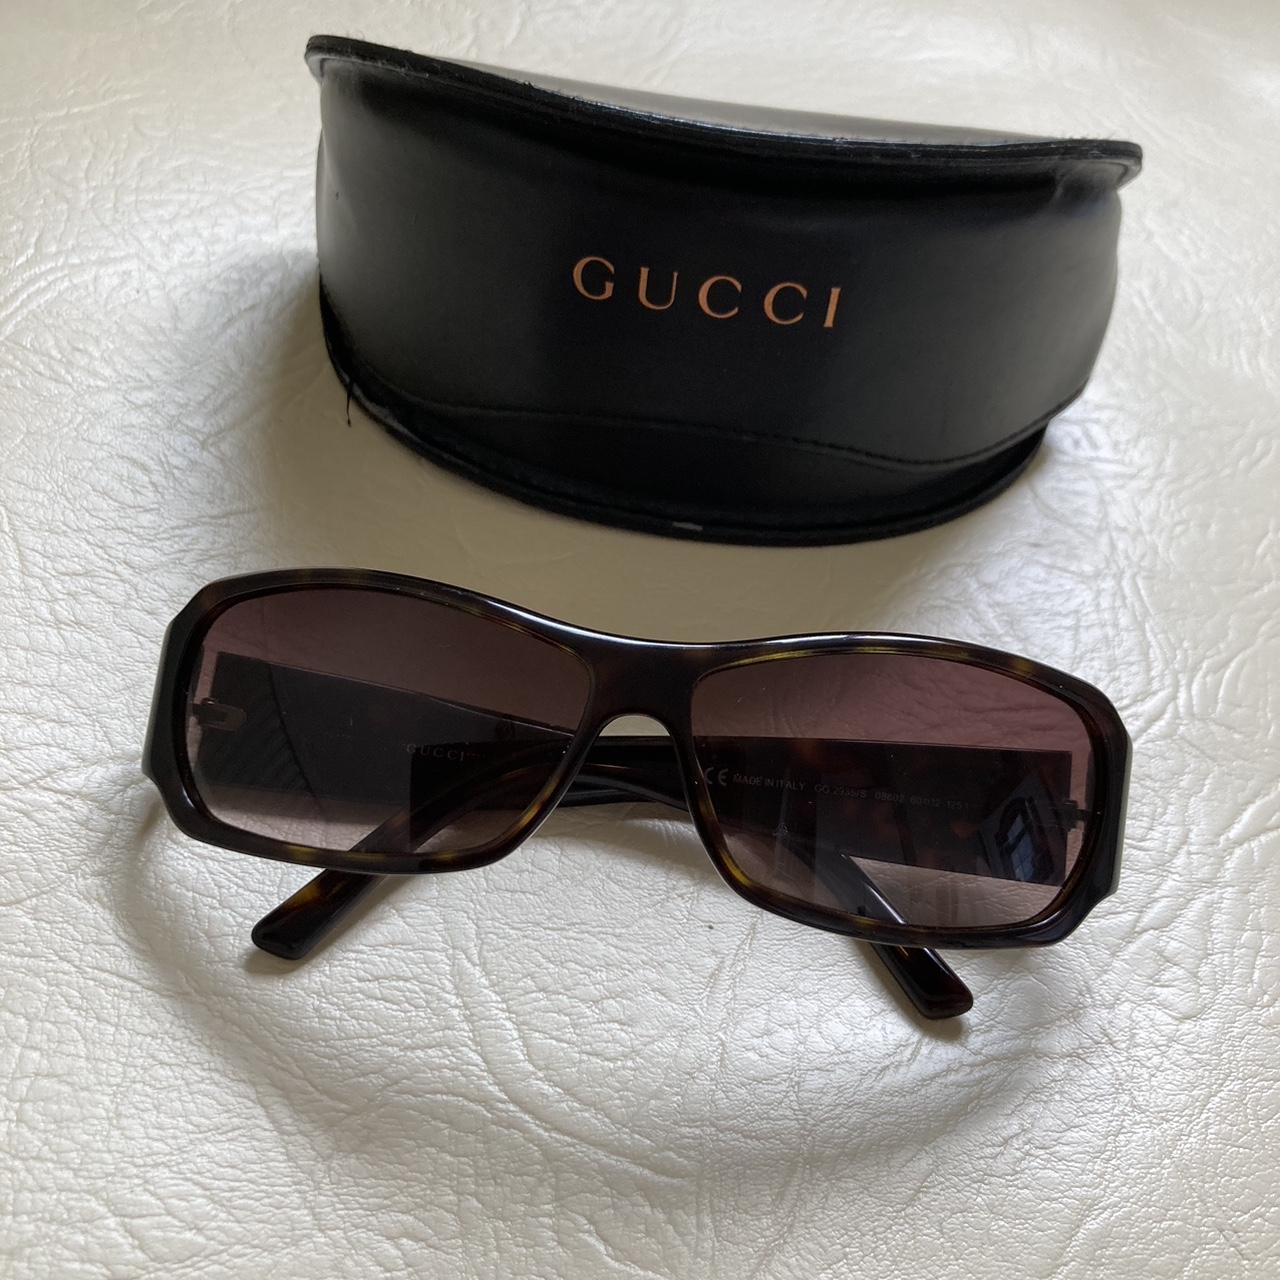 Gucci Women's Brown and Gold Sunglasses | Depop